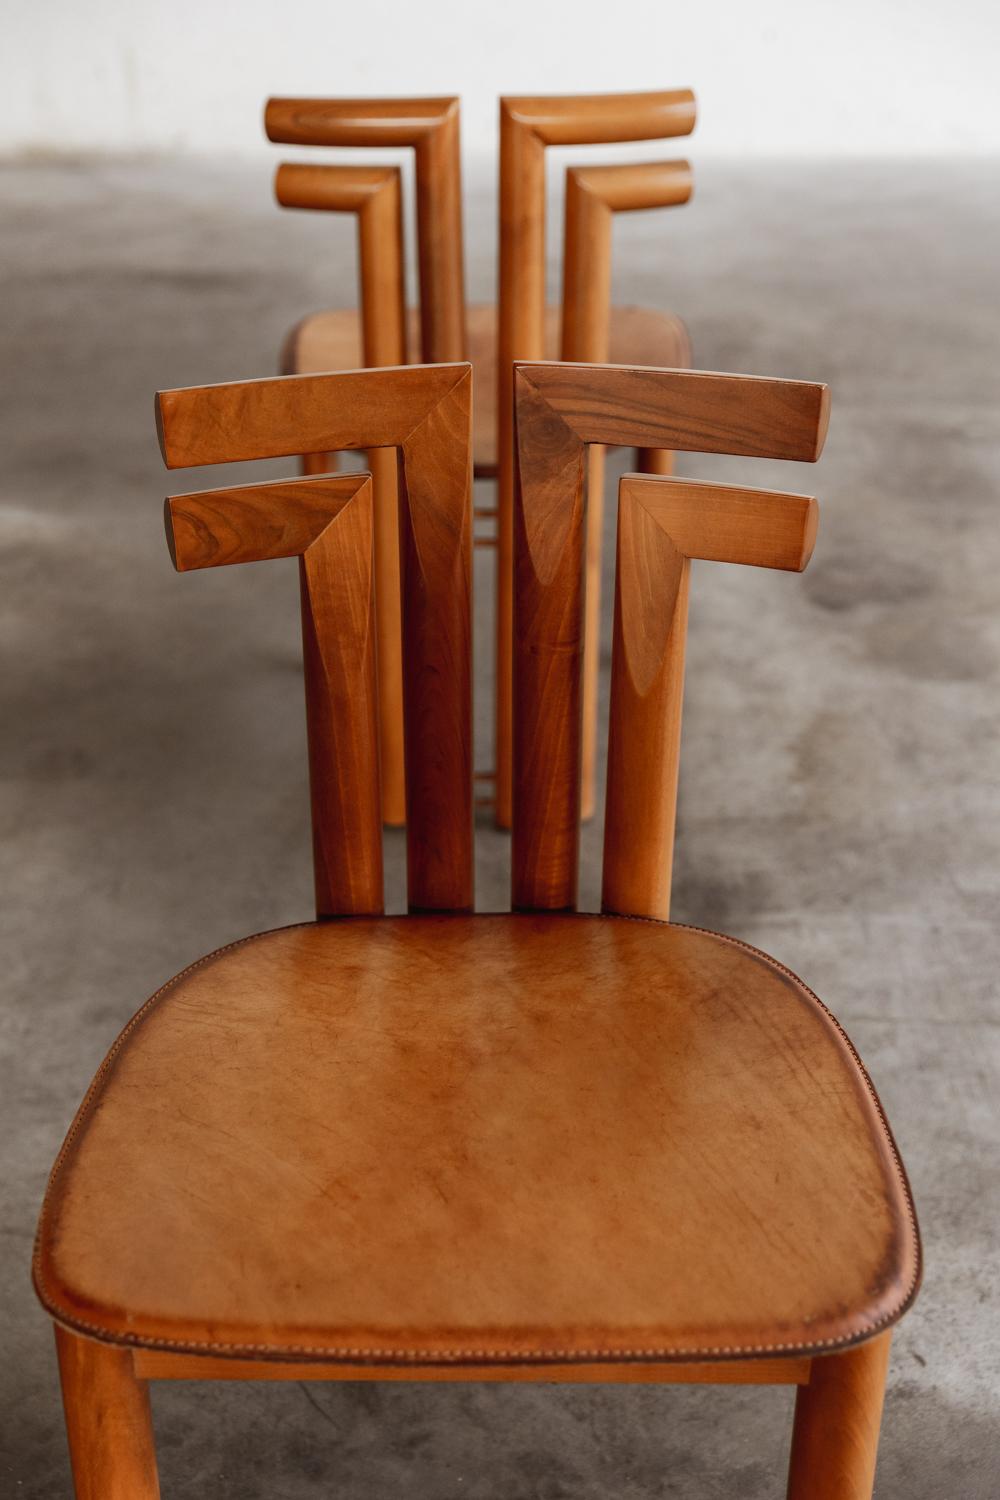 Leather Mario Marenco “Sapporo” Dining Chairs for Mobil Girgi, 1970, set of 4 For Sale